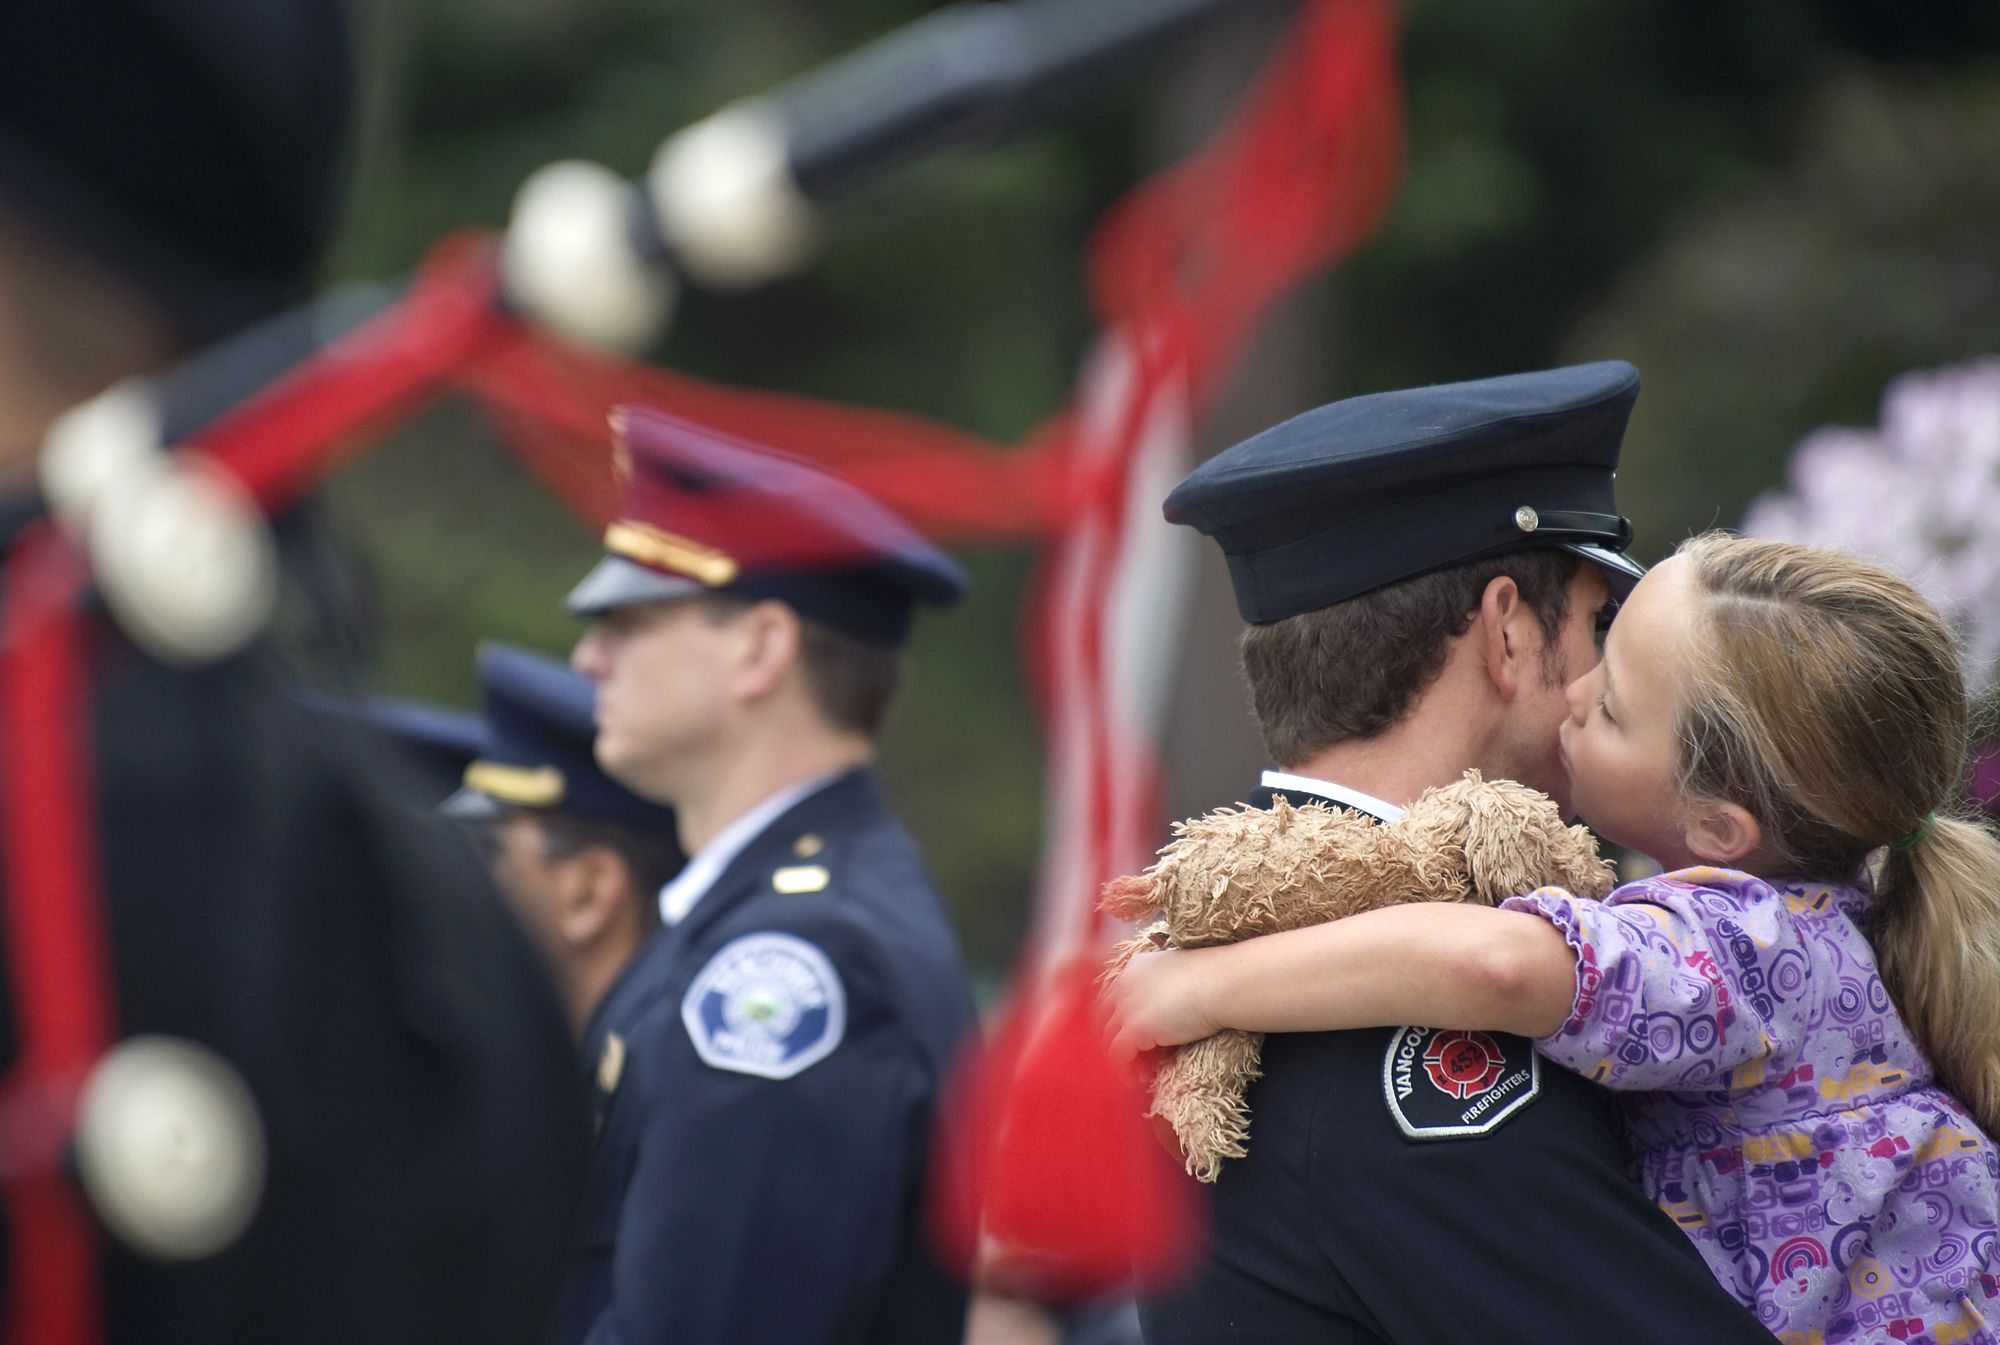 Carsen Yela, 7, of Vancouver, kisses her father, Vancouver firefighter Joe Yela, during a Sept. 11, 2010 flag ceremony to observe the ninth anniversary of Sept. 11, 2001.